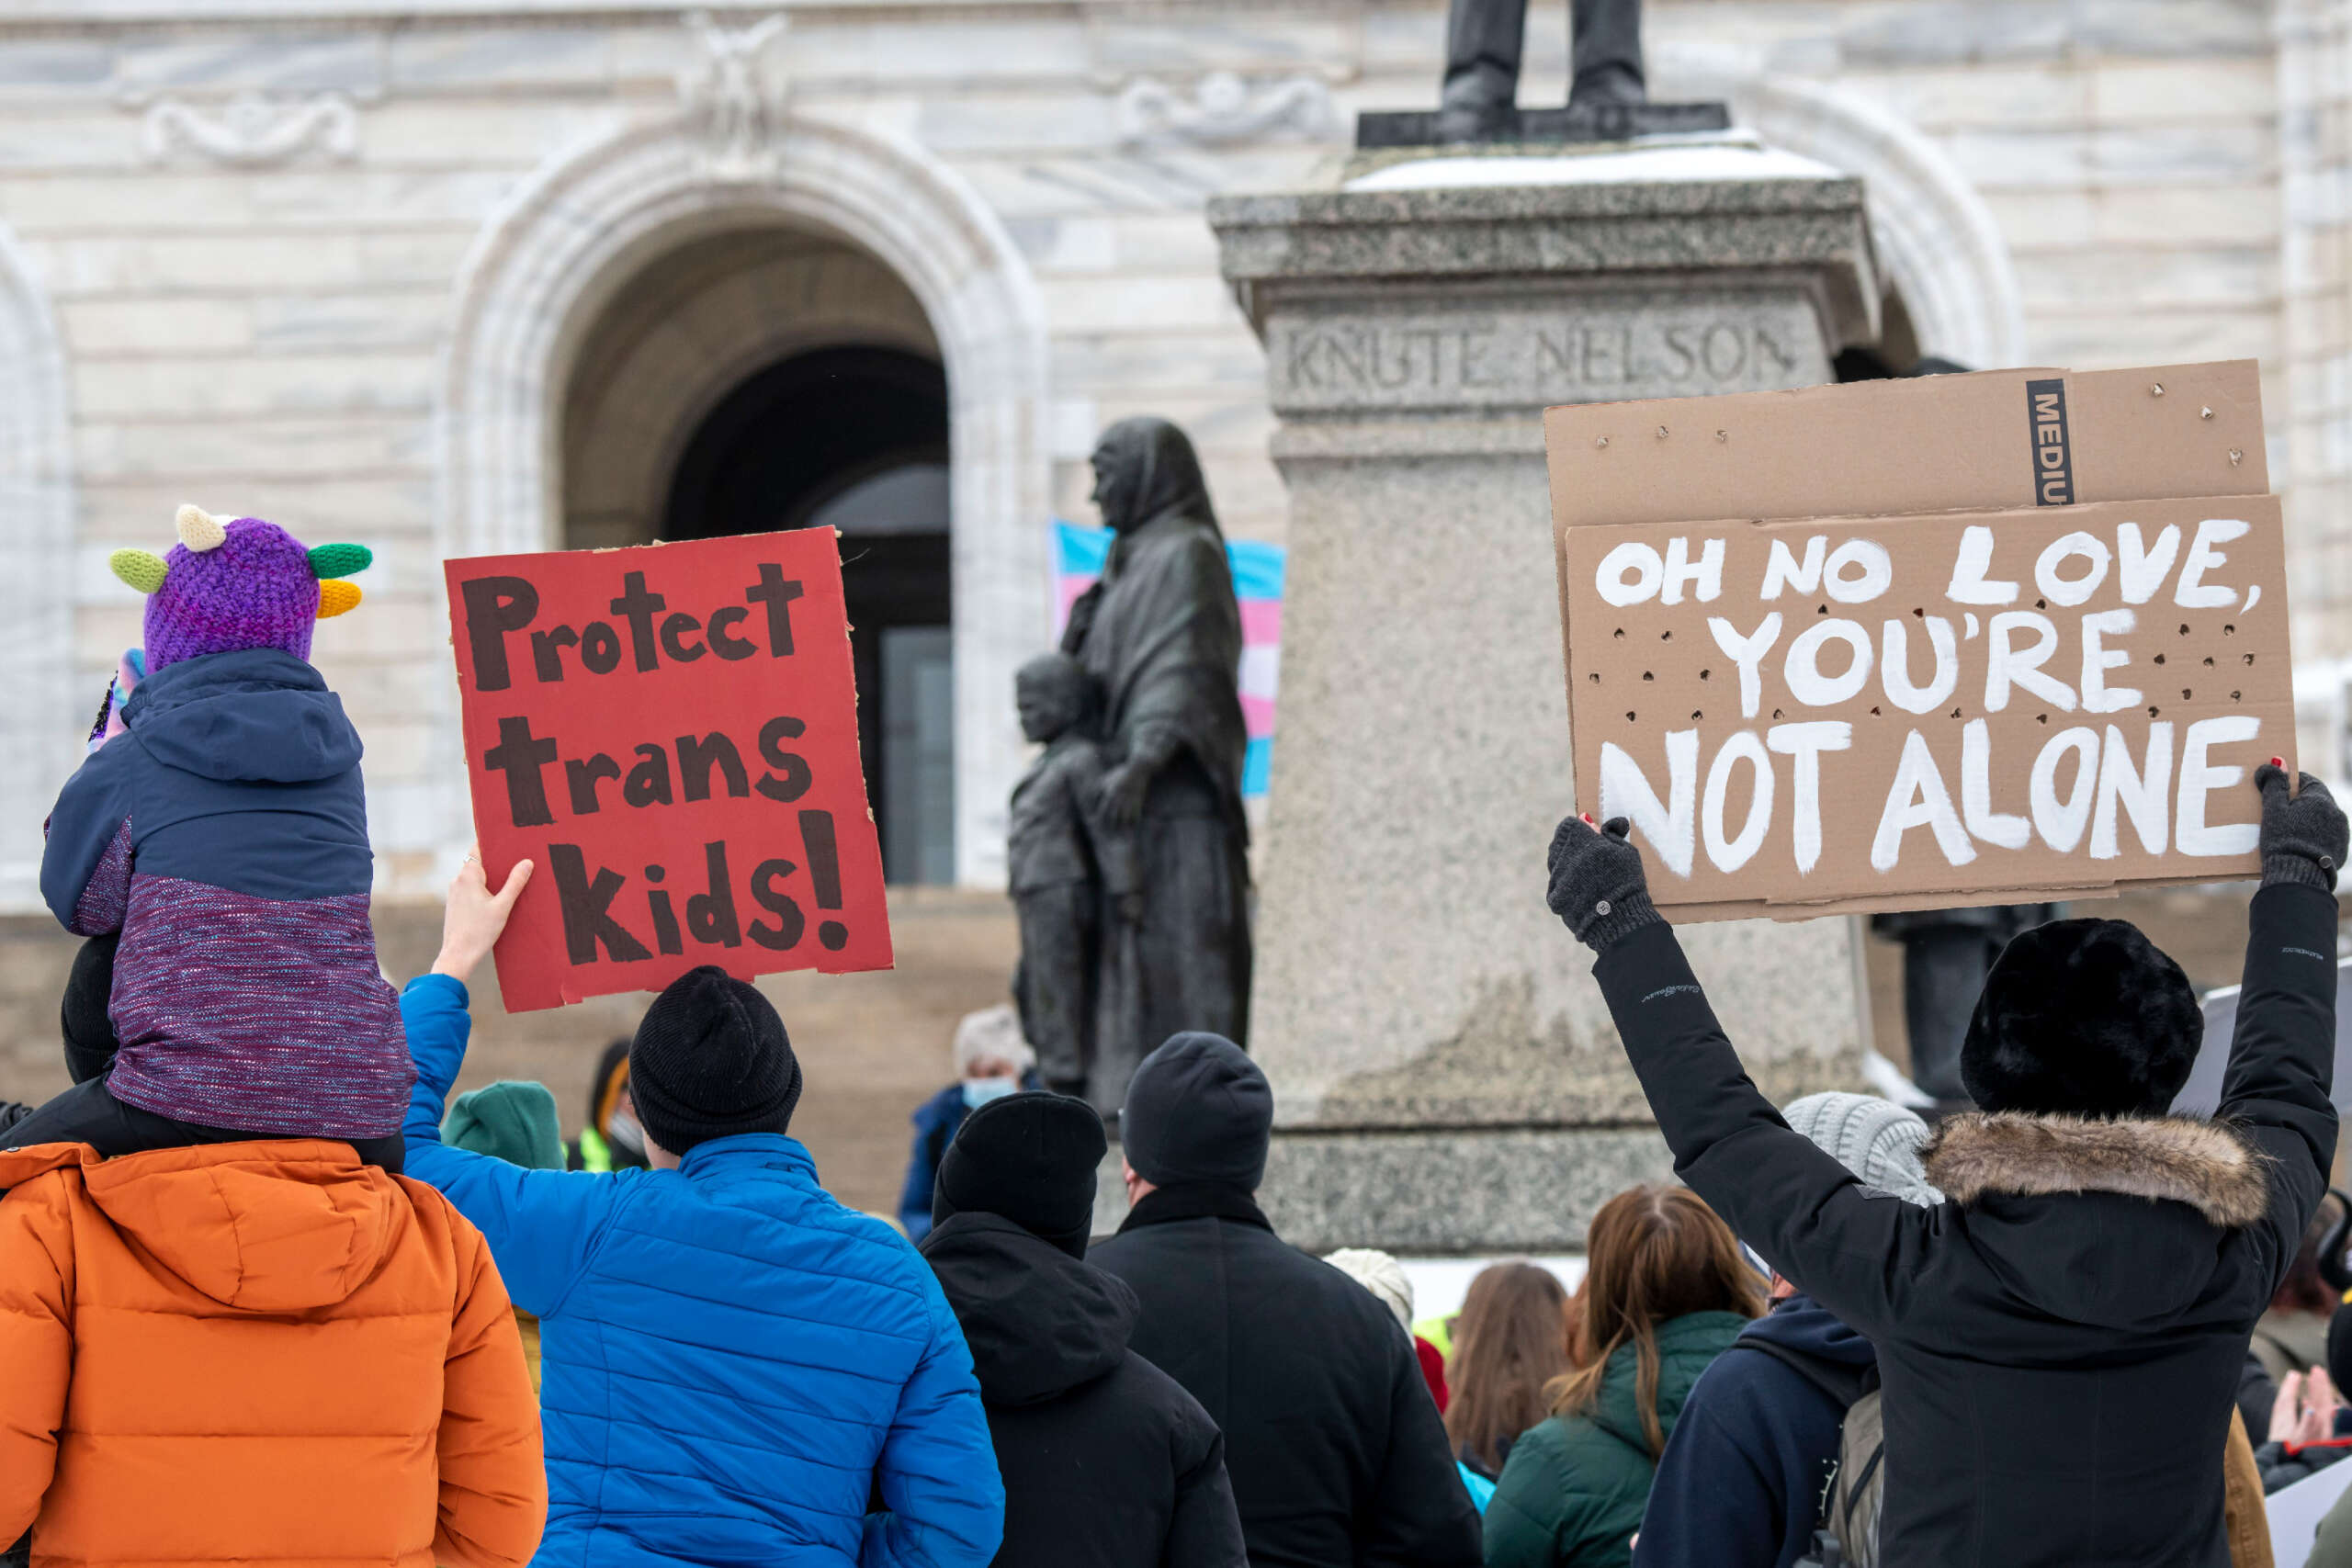 Students at McGill University in Montreal Protest Anti-Trans Speaker